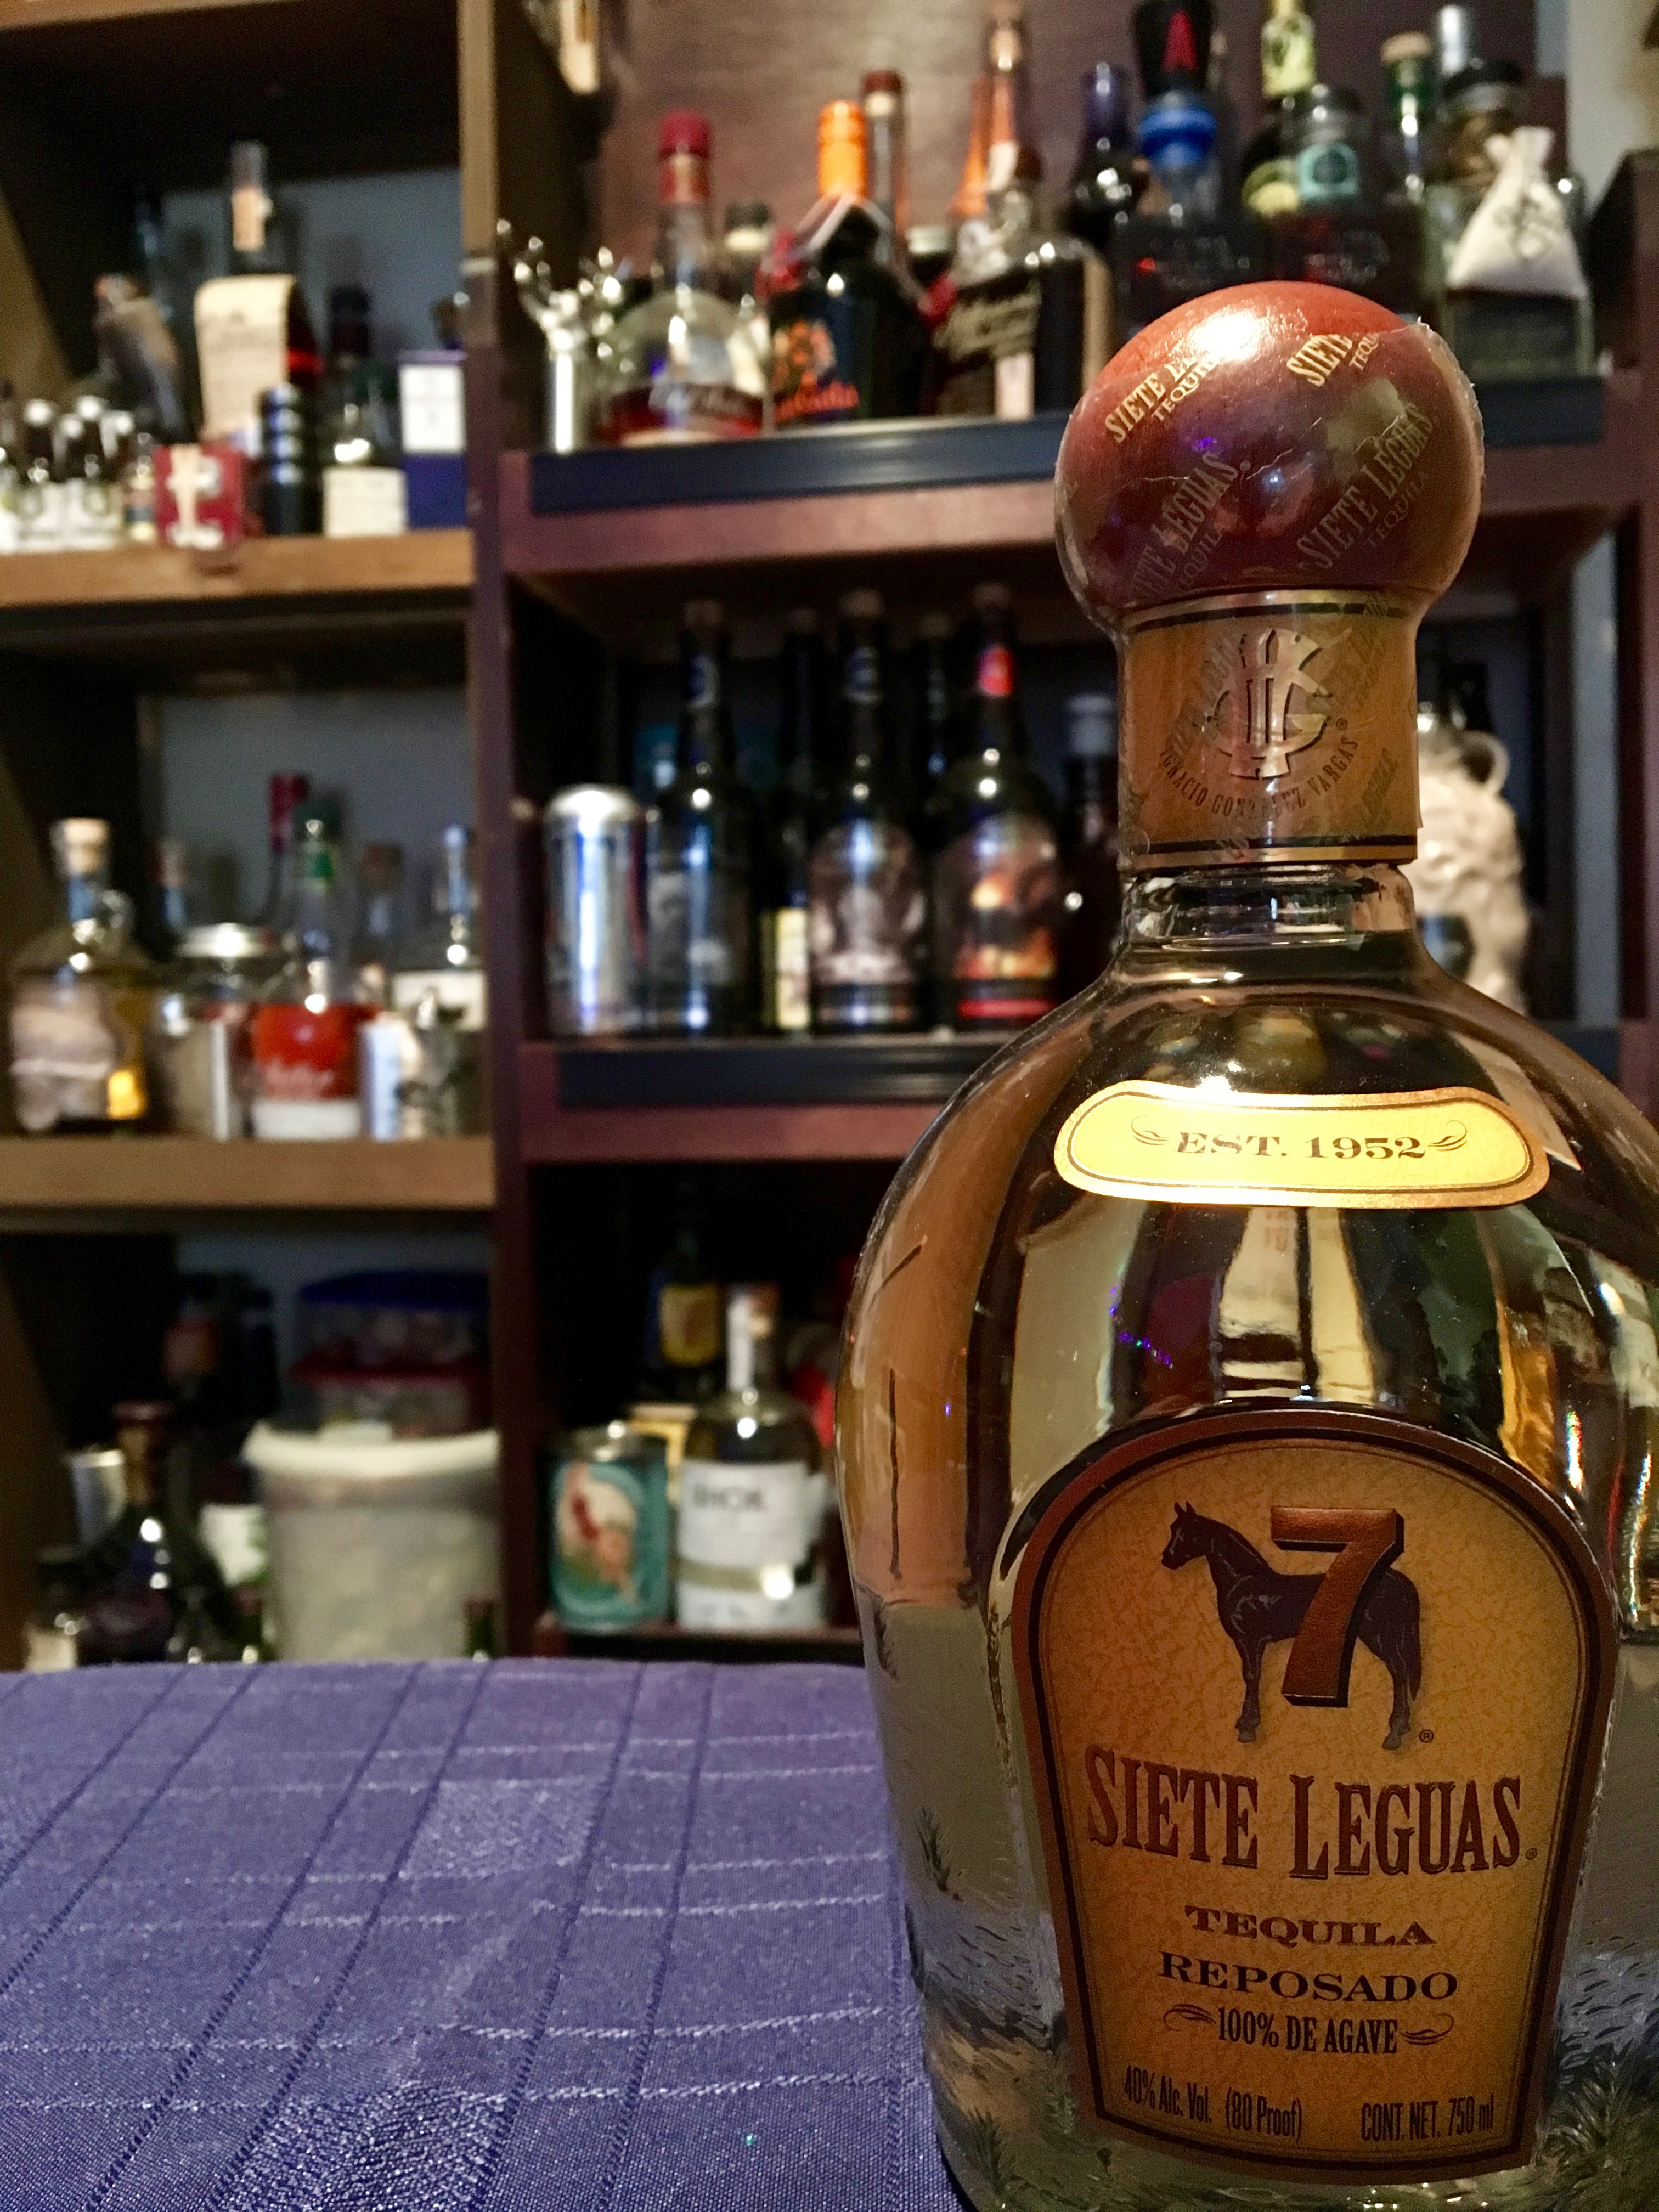 Read more about the article Siete Lequas Tequila Reposado